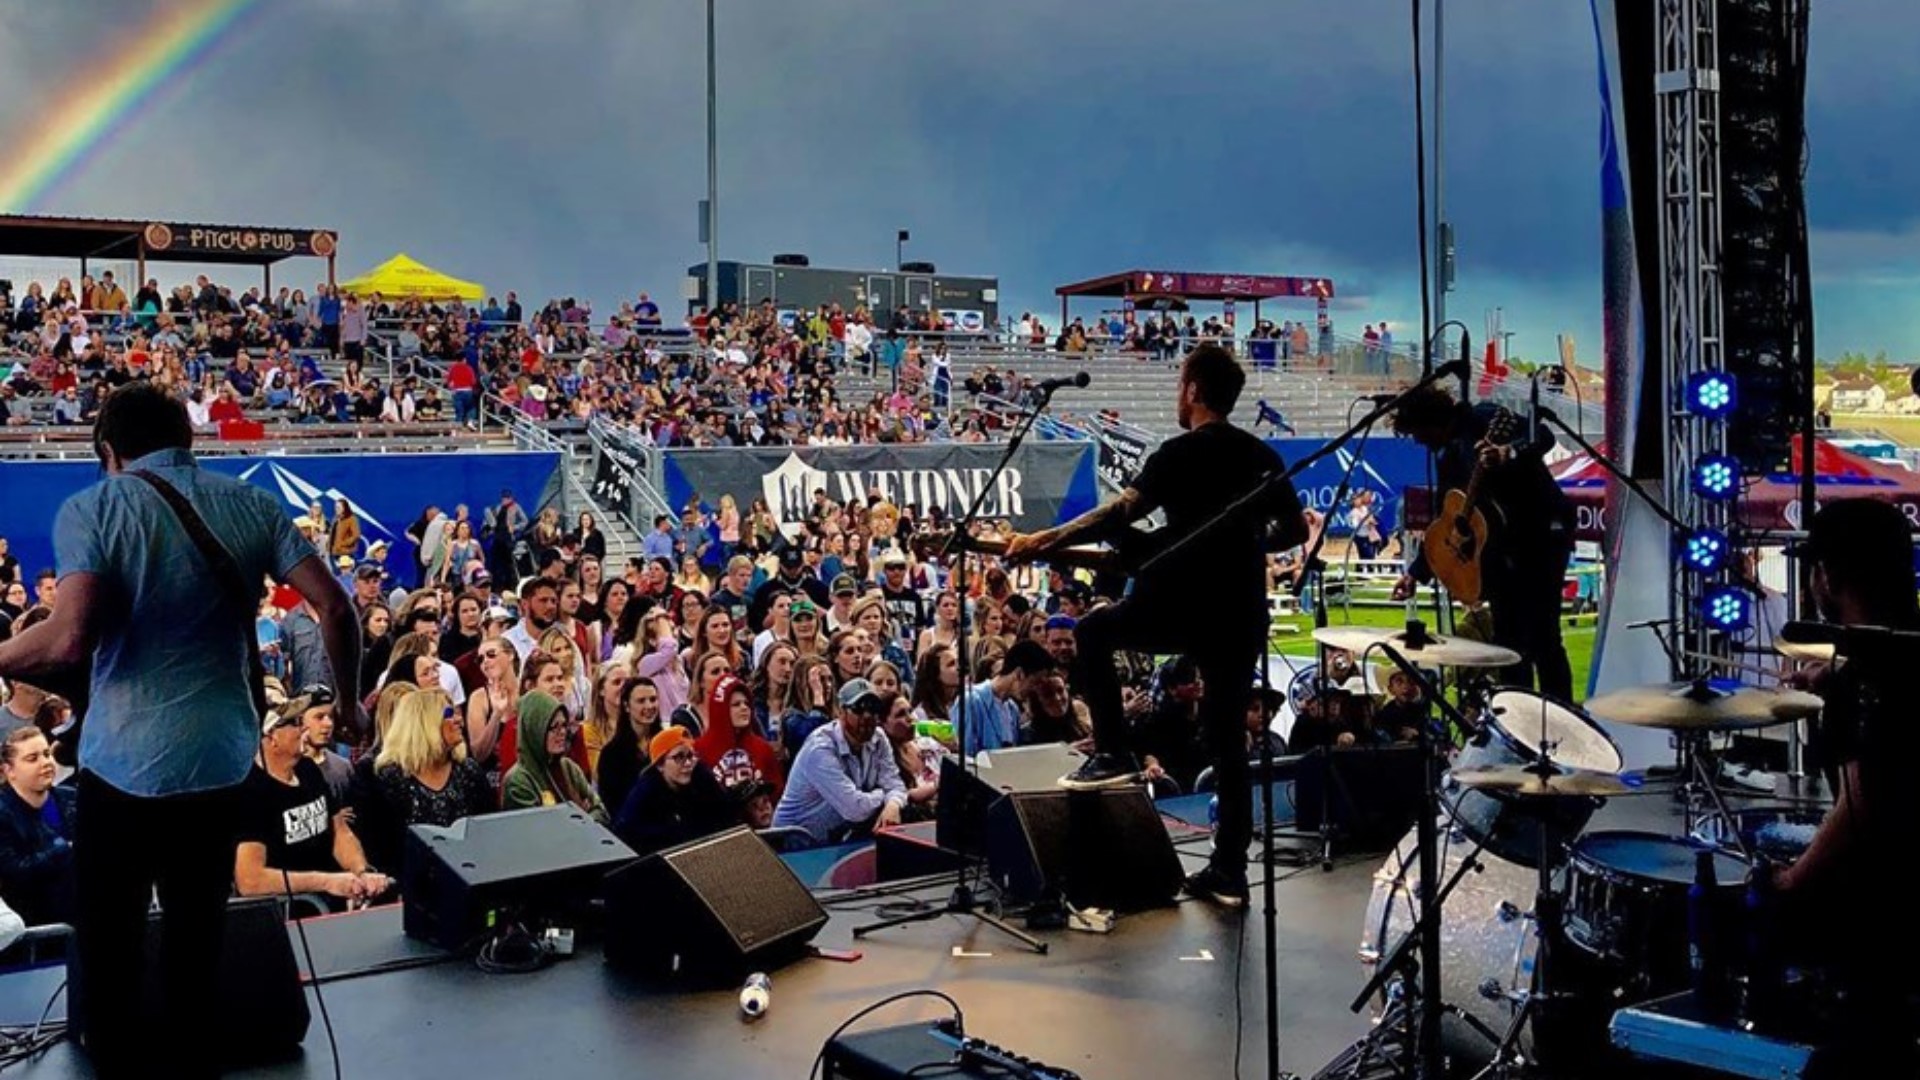 Zoko 822, The Garage Bar and StreetEatsGR are teaming up for a Block Party with Gunnar & The Grizzly Boys!  It's Saturday, July 20 2019 with doors opening at 11 a.m.